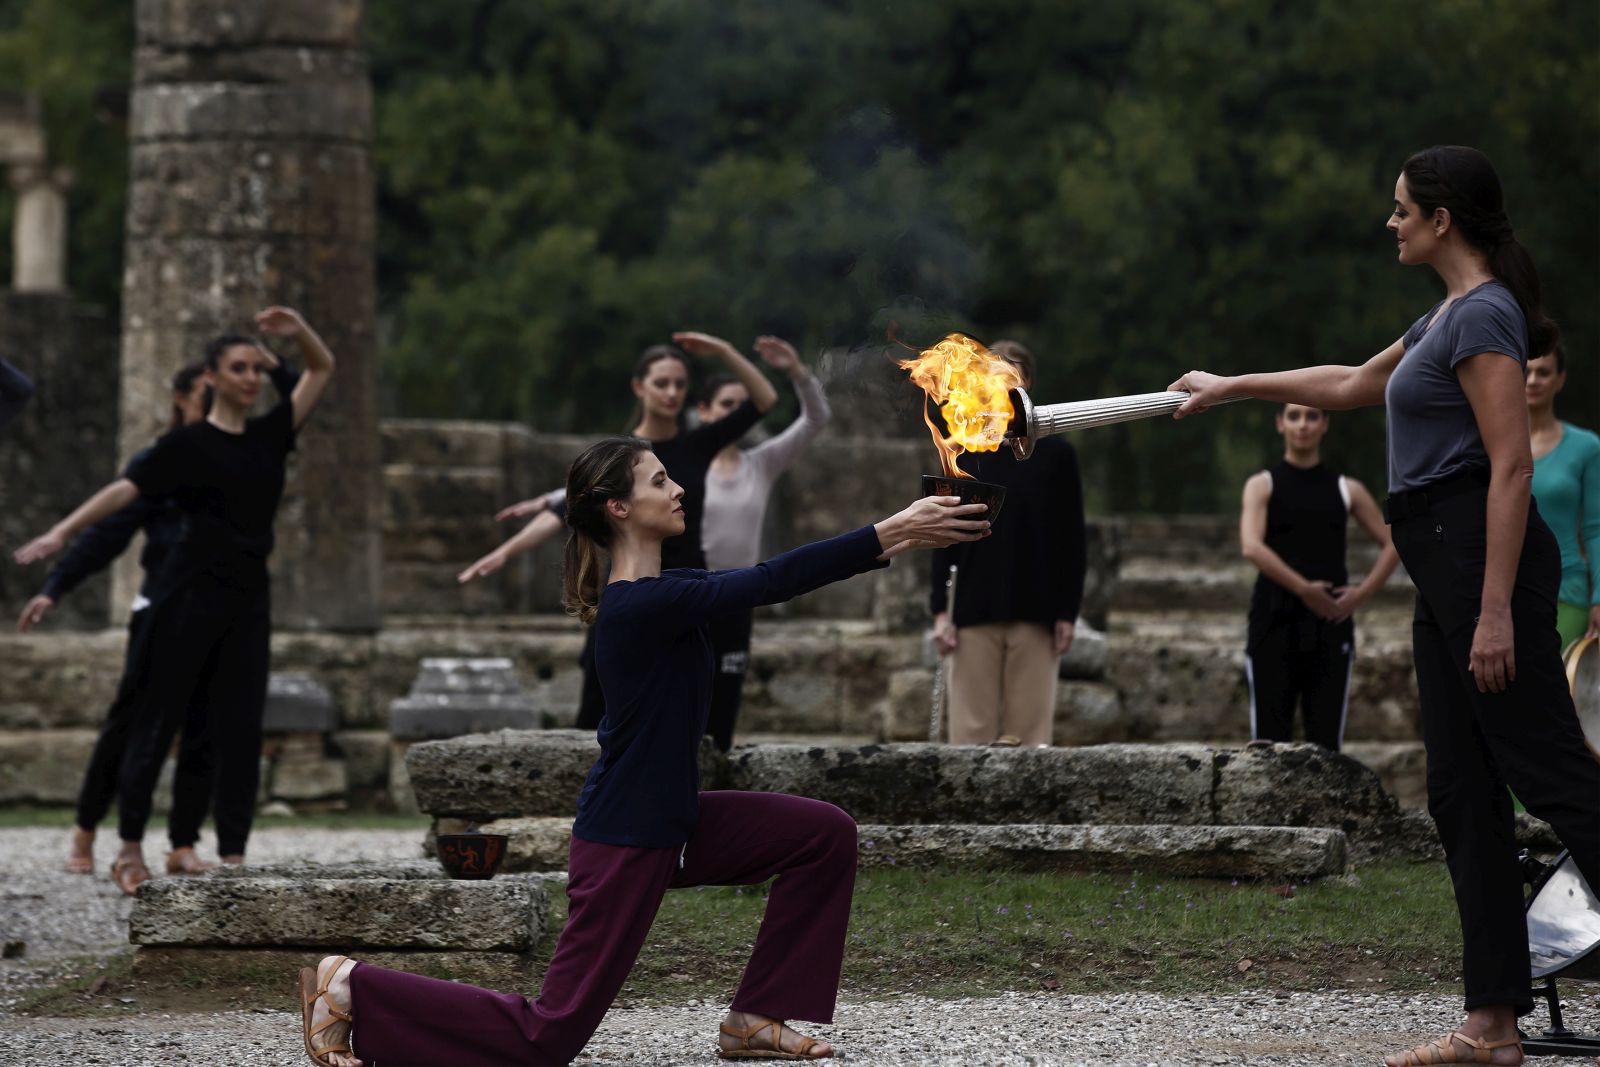 epa09528355 Greek actress Xanthi Georgiou (R), playing the role of High Priestess, lights the flame during the rehearsal of the Olympic flame lighting ceremony for the Beijing 2022 Winter Olympics, at the Ancient Olympia site, in southern Greece, 17 October 2021.  EPA/YANNIS KOLESIDIS